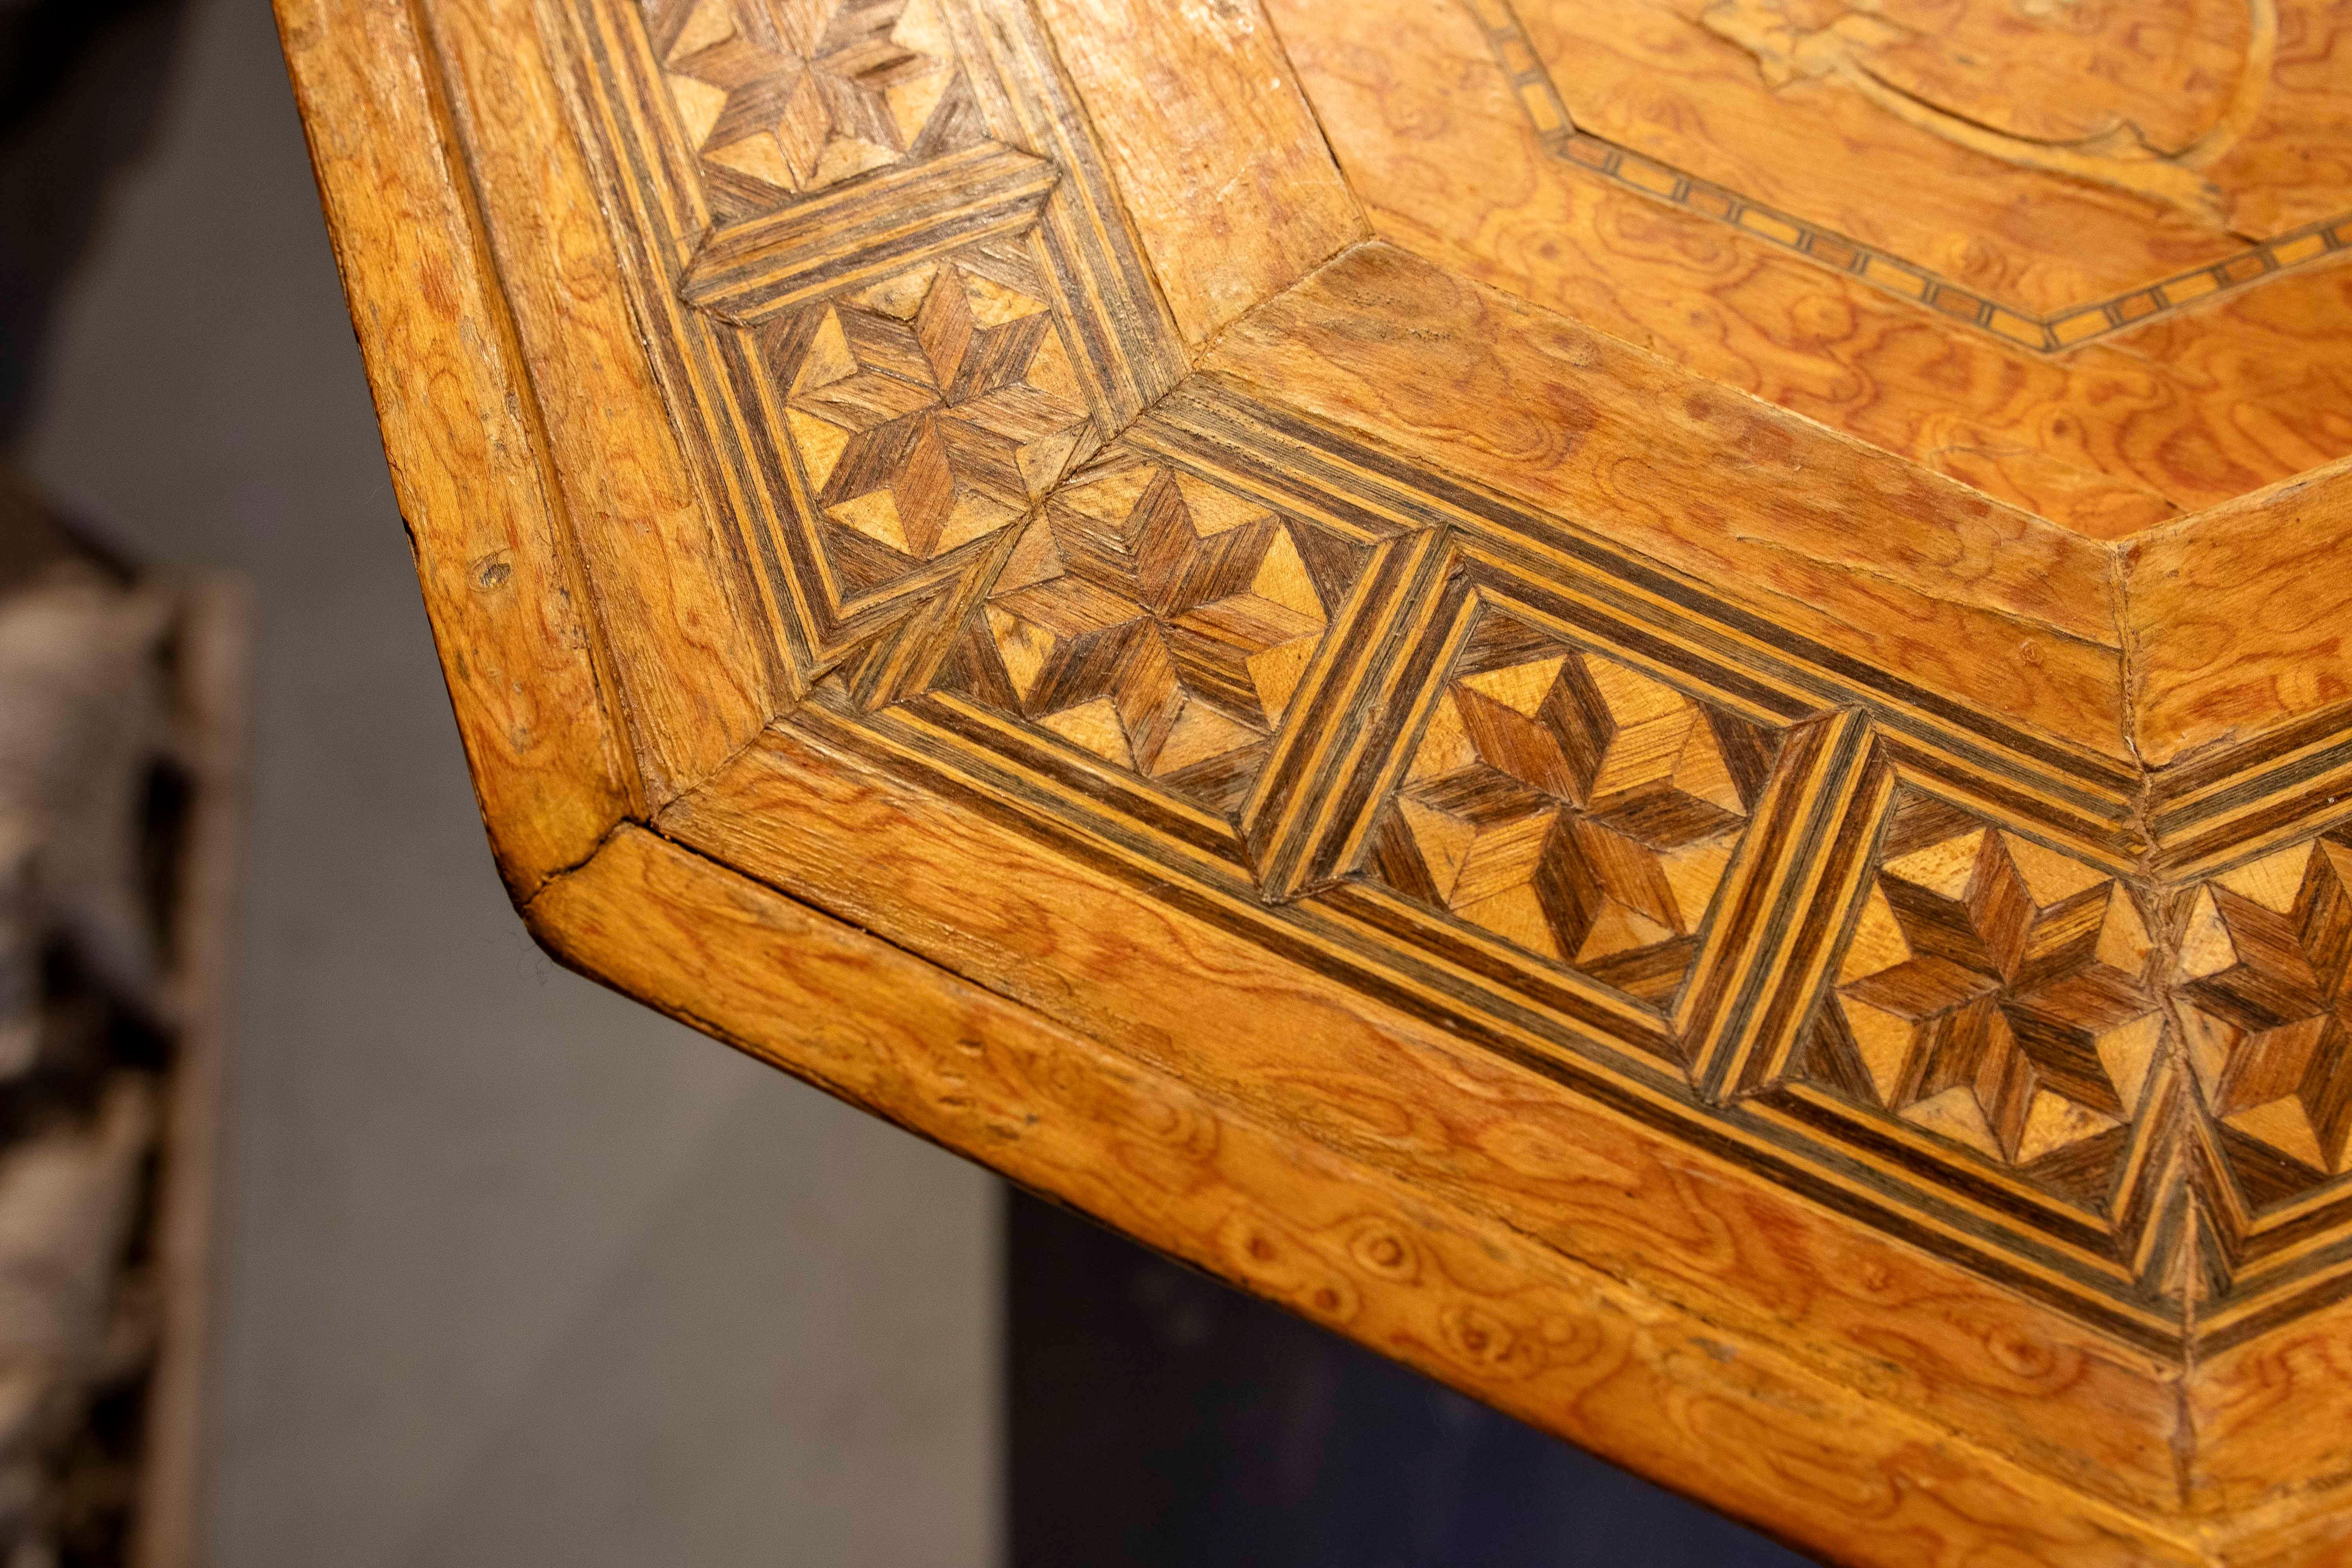  1980s Octagonal Wooden Table with Inlays 9